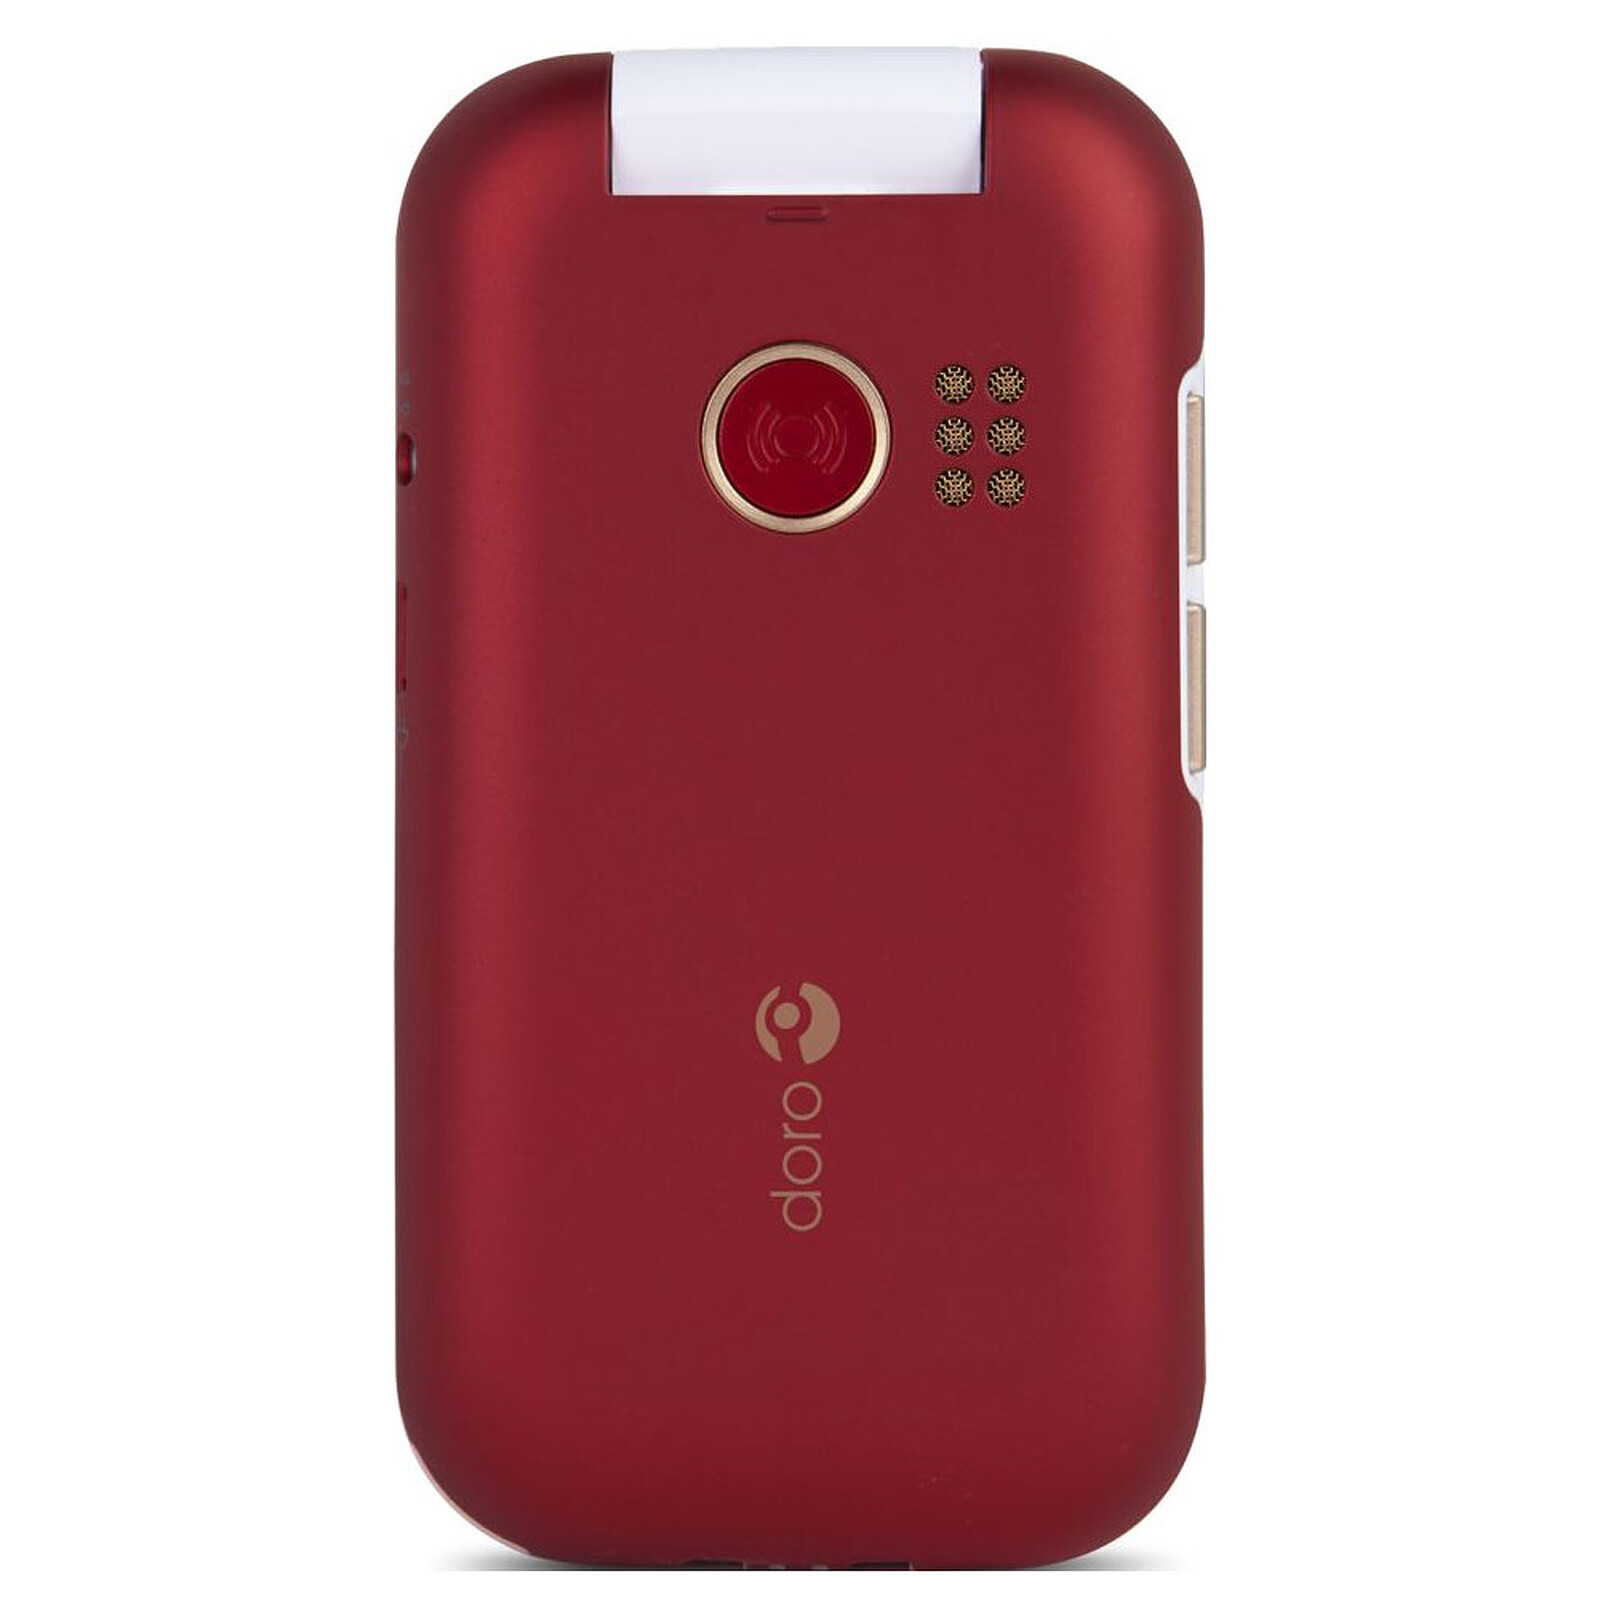 Doro 6060 Red - Mobile phone & smartphone - LDLC 3-year warranty